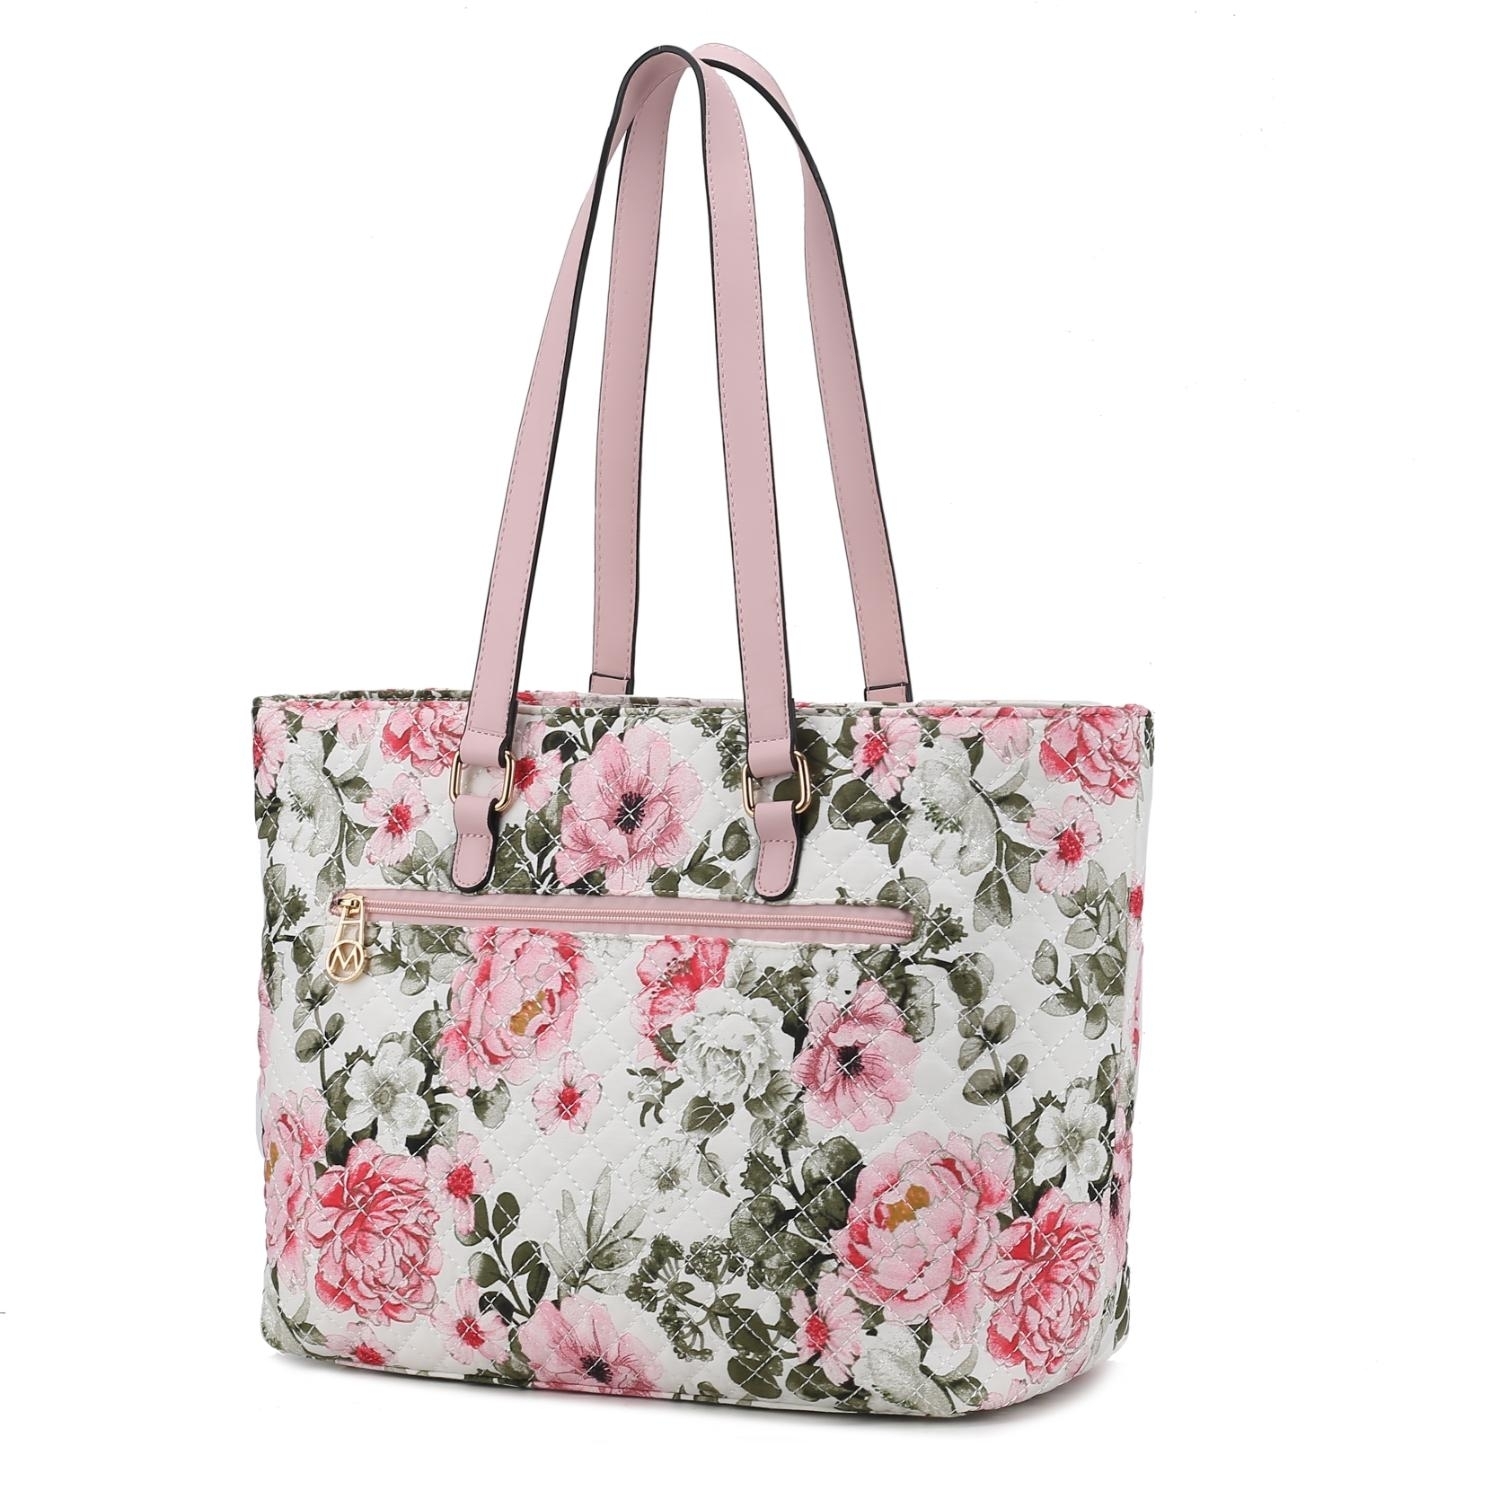 MKF Collection Hallie Quilted Cotton Botanical Pattern Women's Tote Bag By Mia K - White